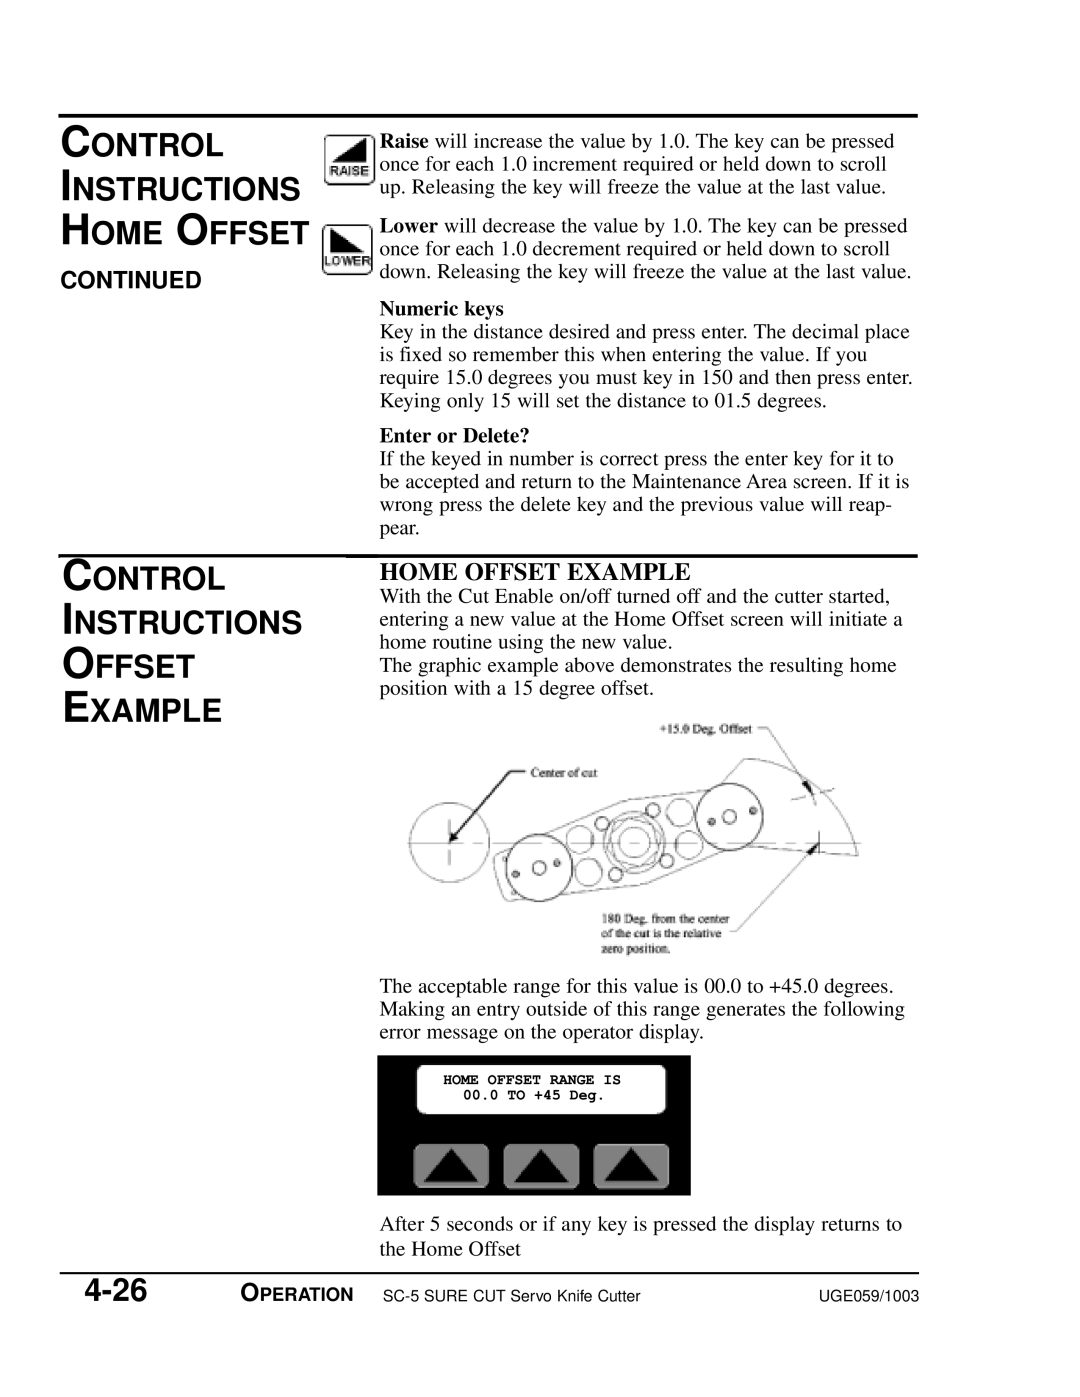 Conair SC-5 Control Instructions Offset Example, 4-26, Home Offset Example, Control Instructions Home Offset, Continued 